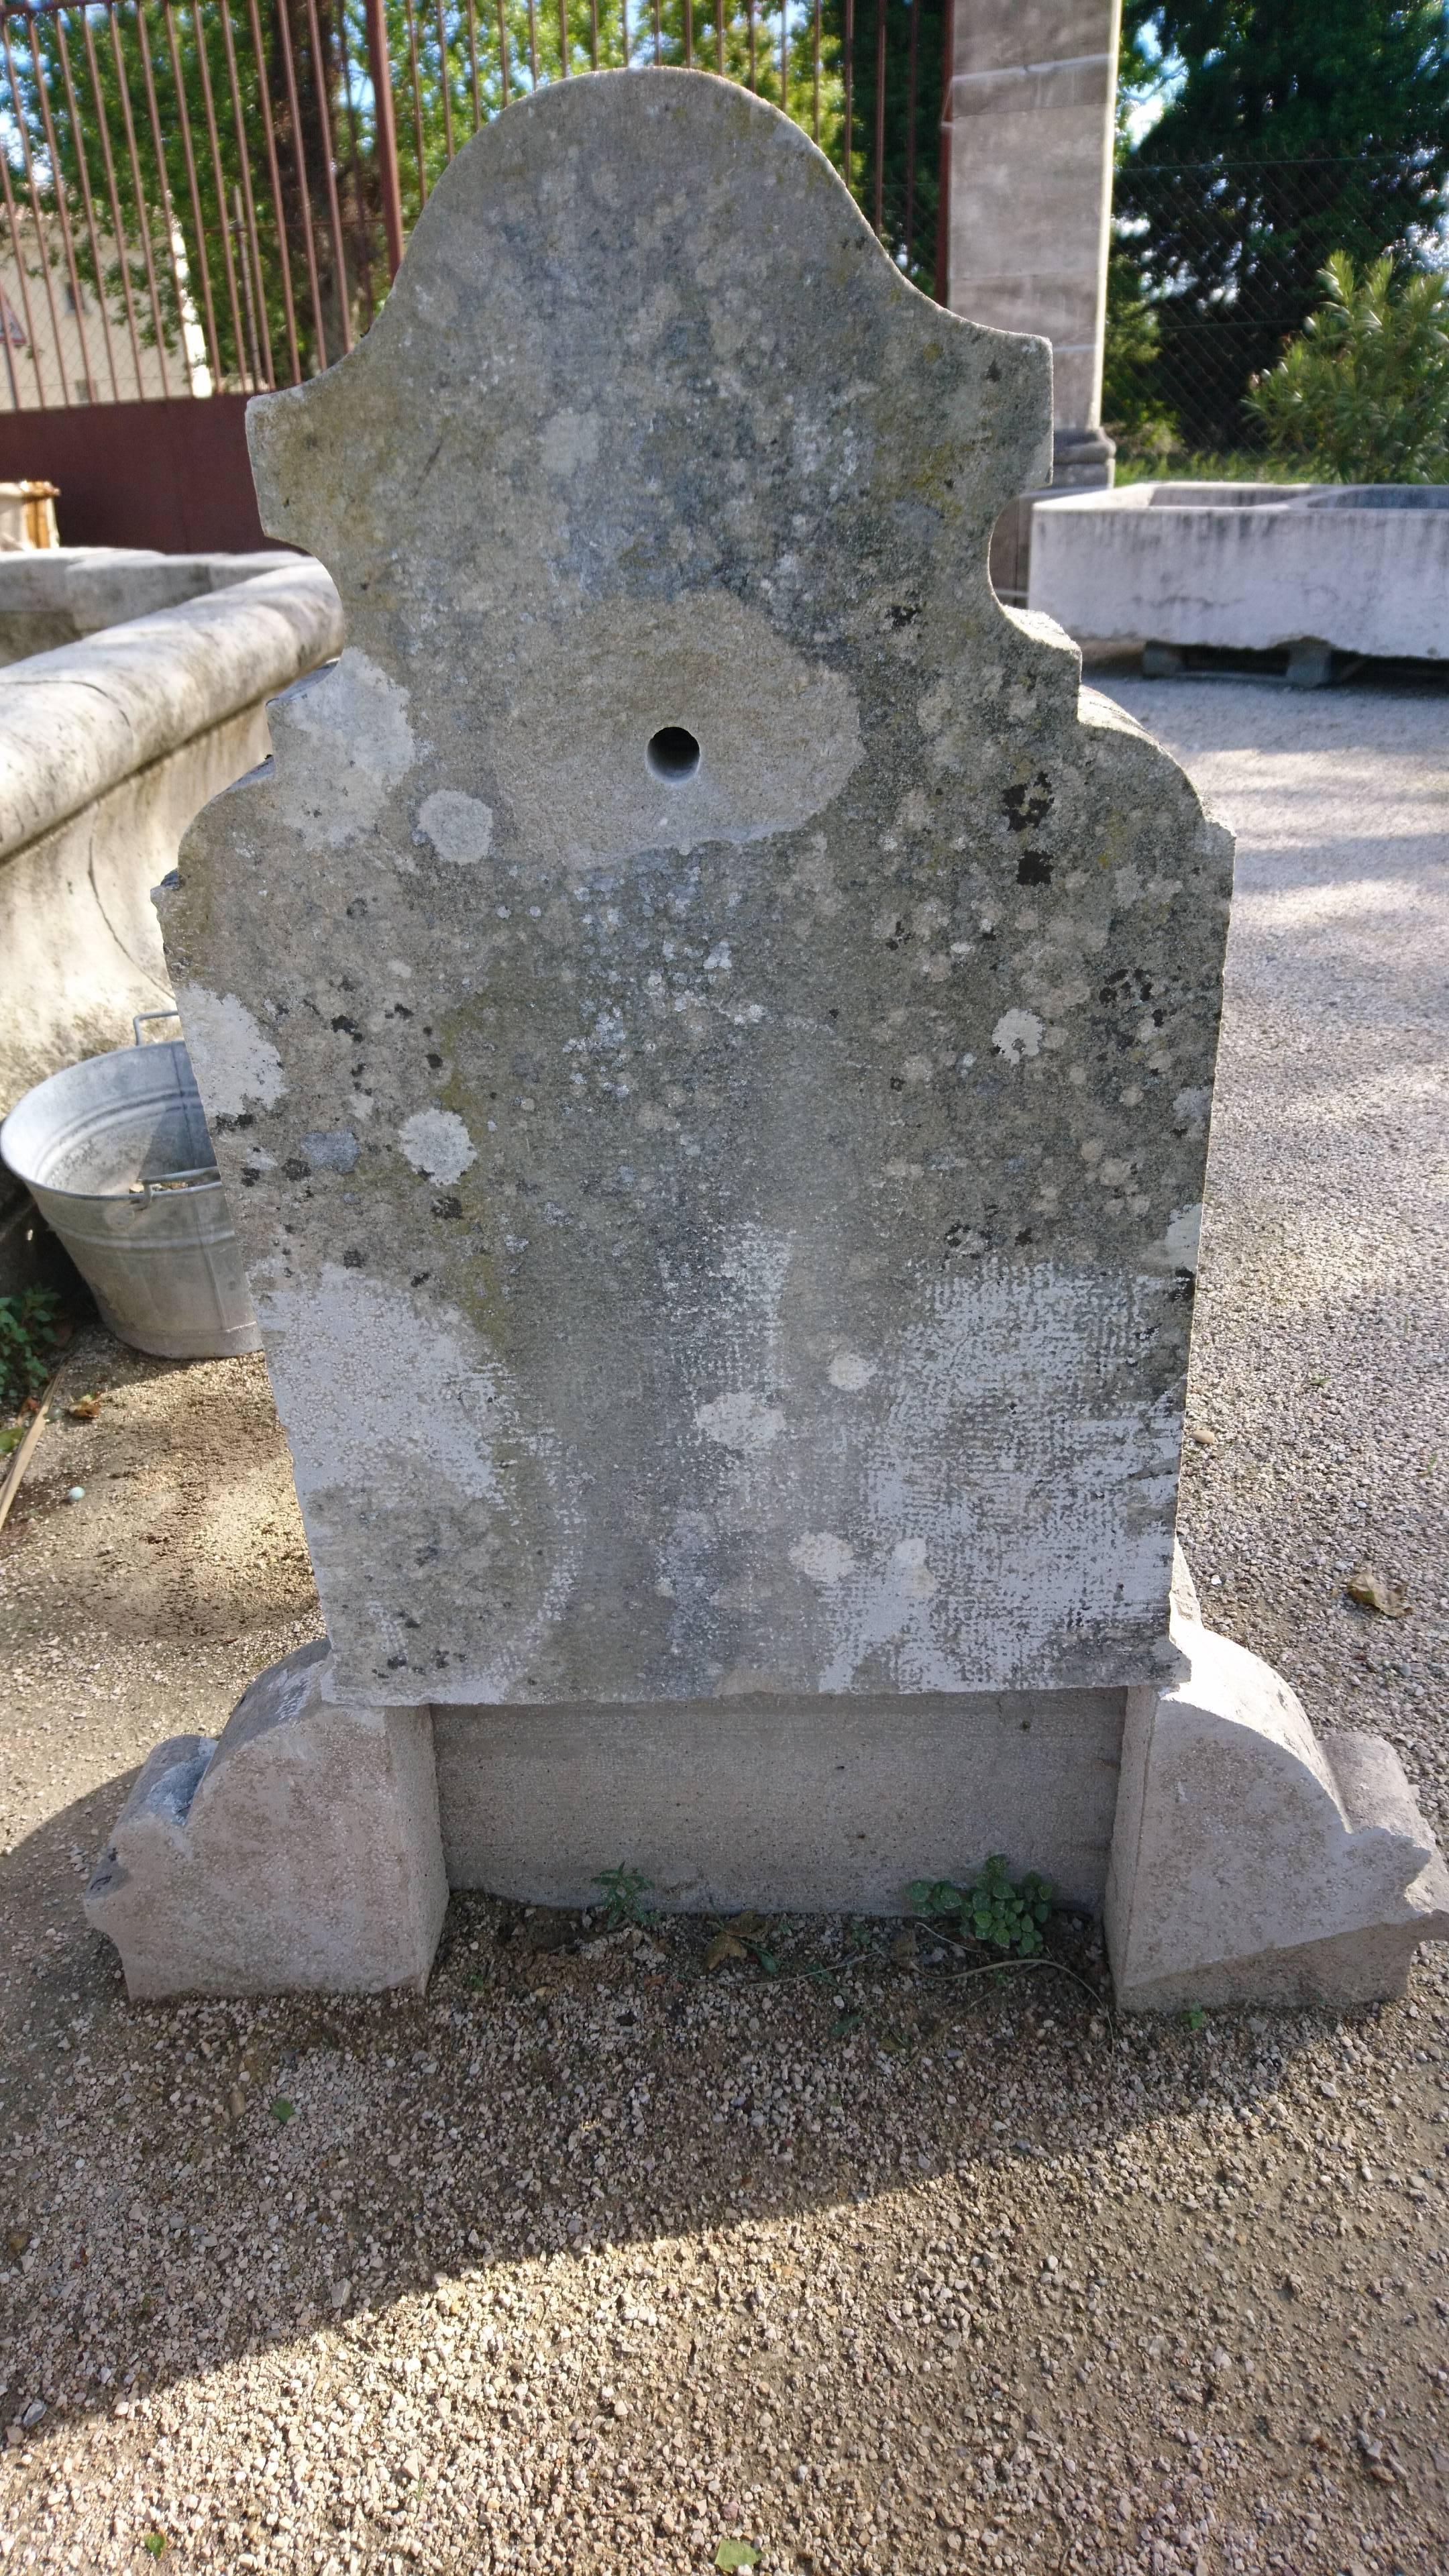 19th Century Wonderful Antique Small Garden Stone Fountain with Ancient Faucet and Metal Bars